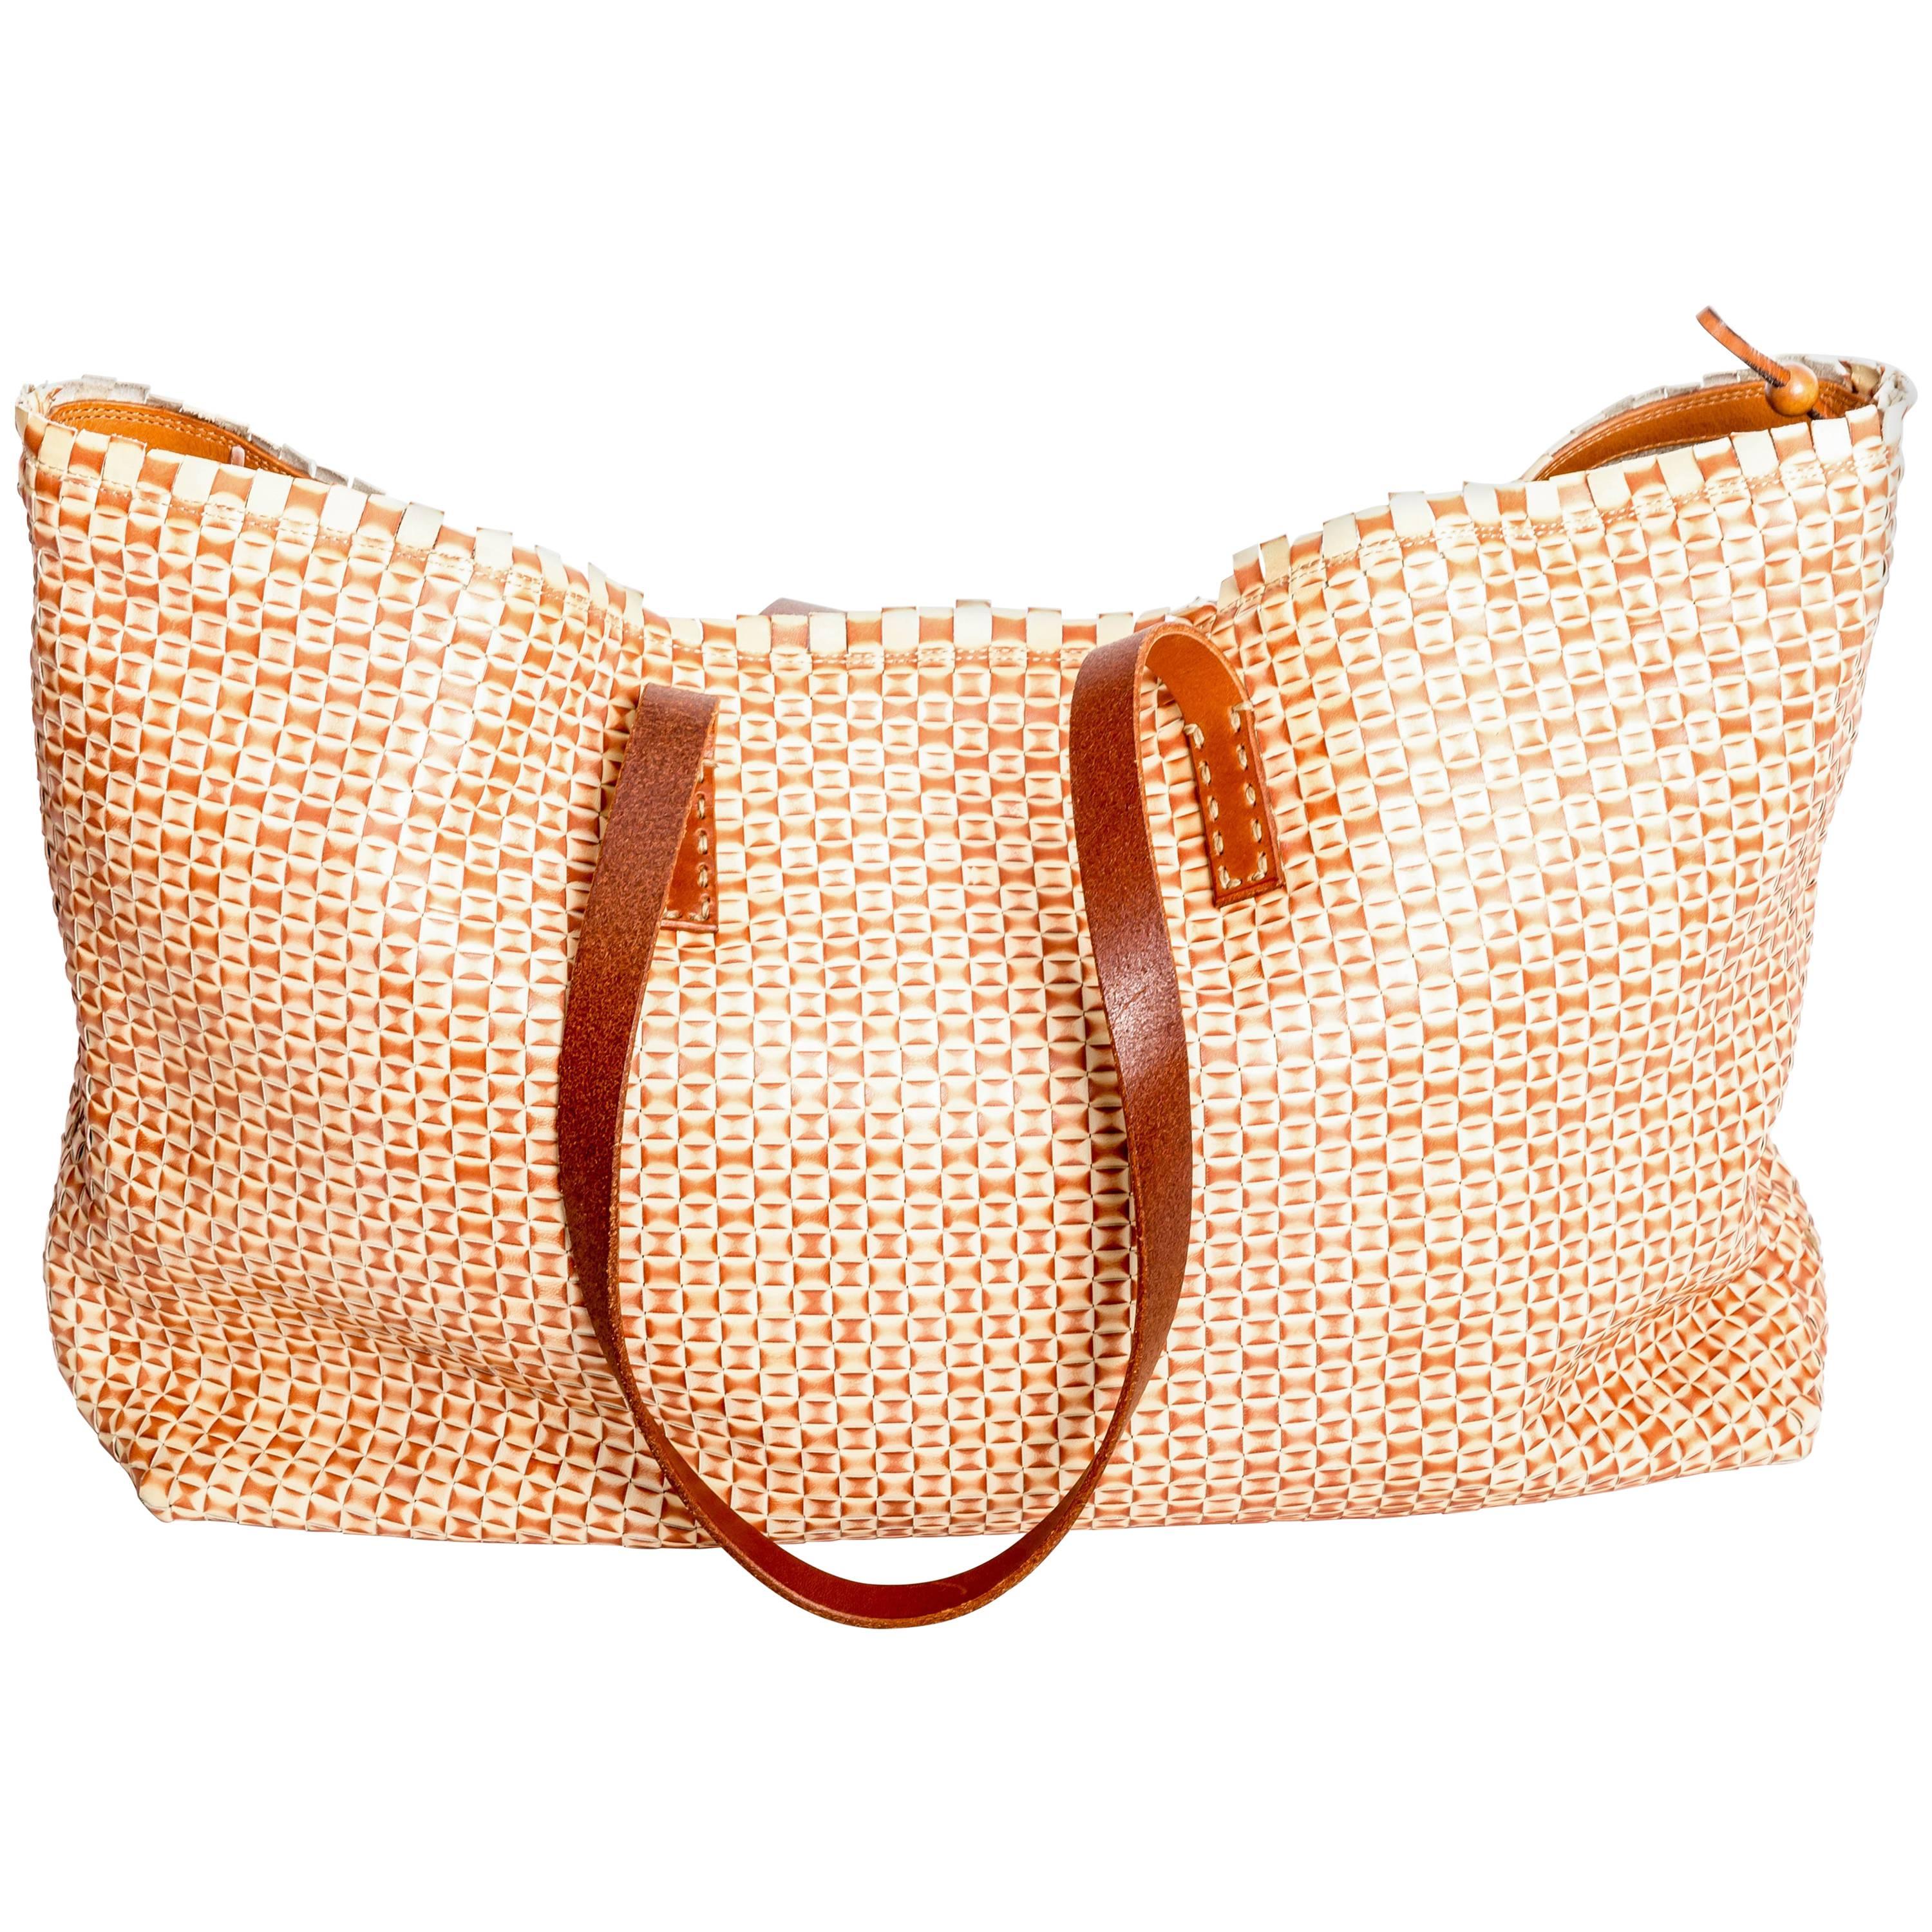 Henry Cuir Woven Leather Tote